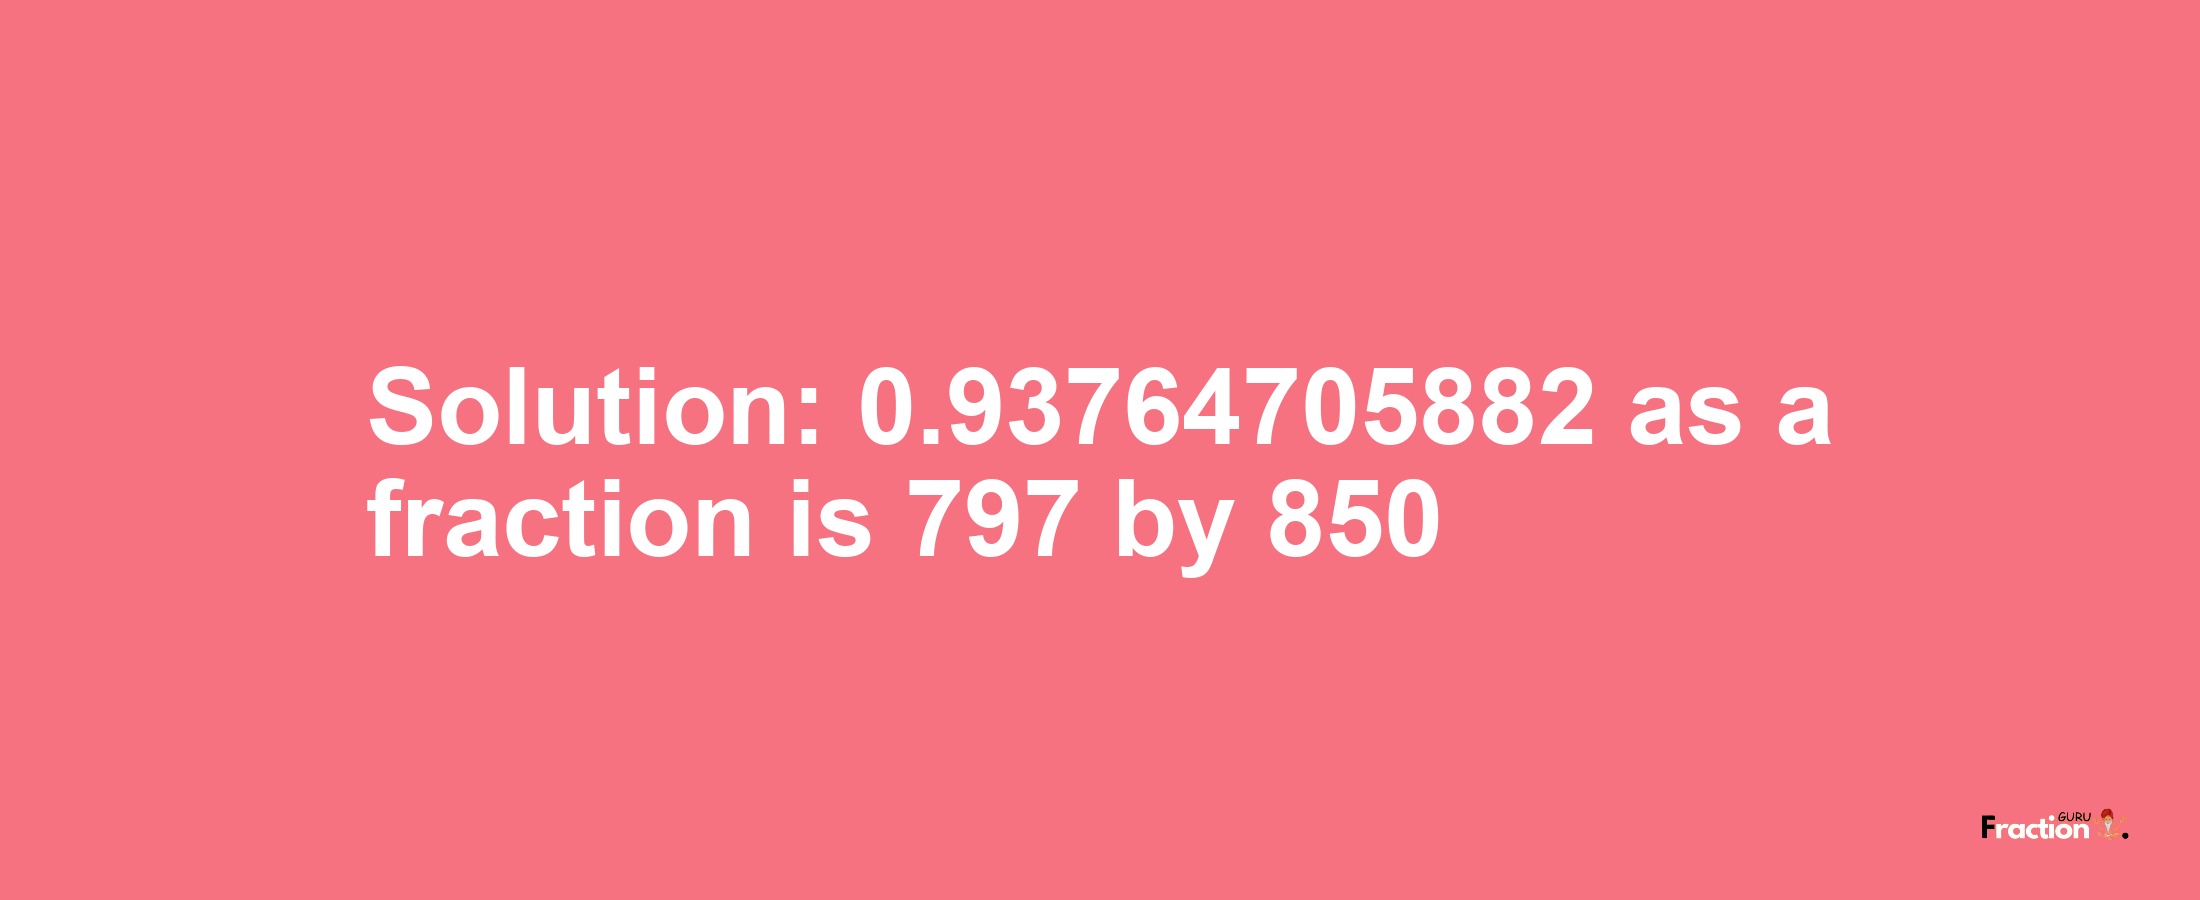 Solution:0.93764705882 as a fraction is 797/850